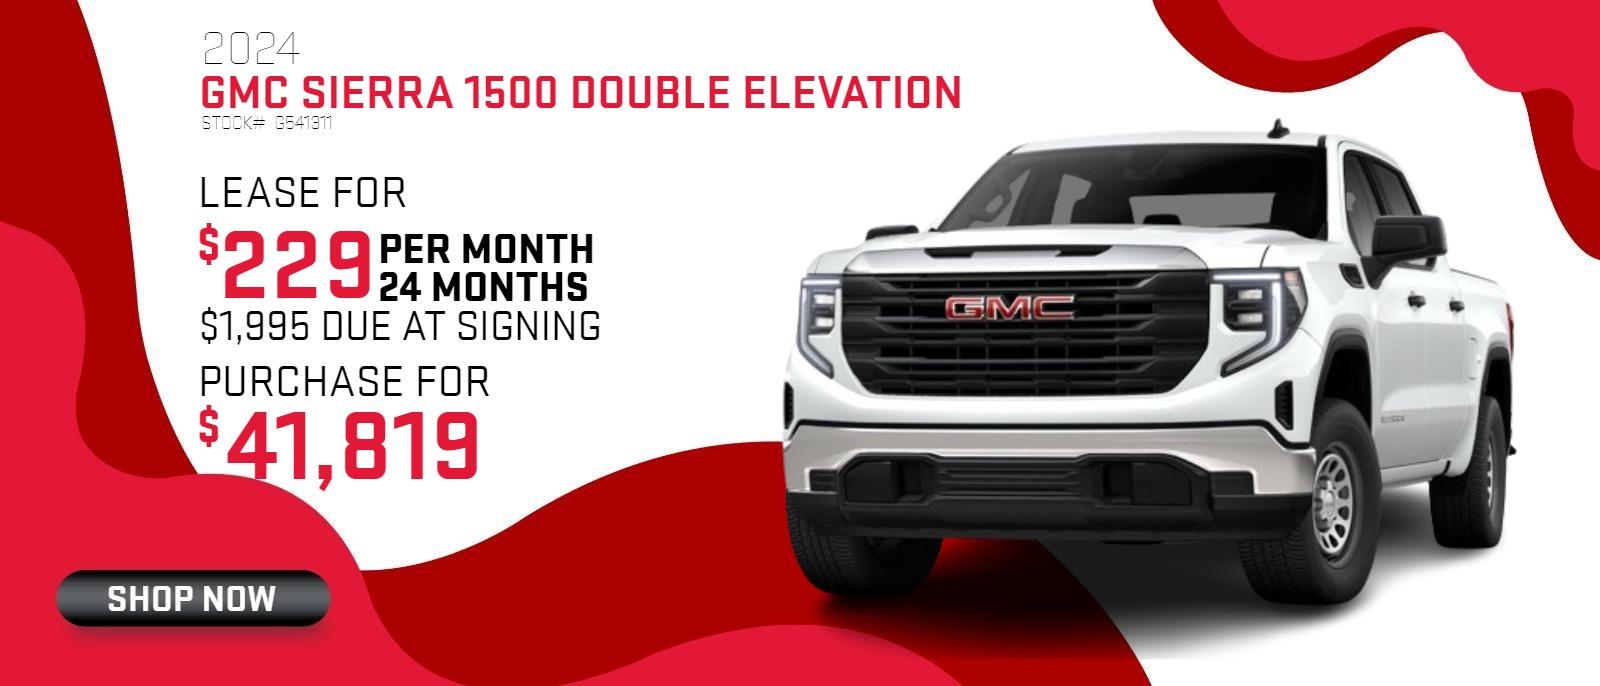 2024 Sierra 1500 Dbl Elevation
Stock# G541311
Lease for $229 per month, 24 months, $1995 down
Purchase for $41,819